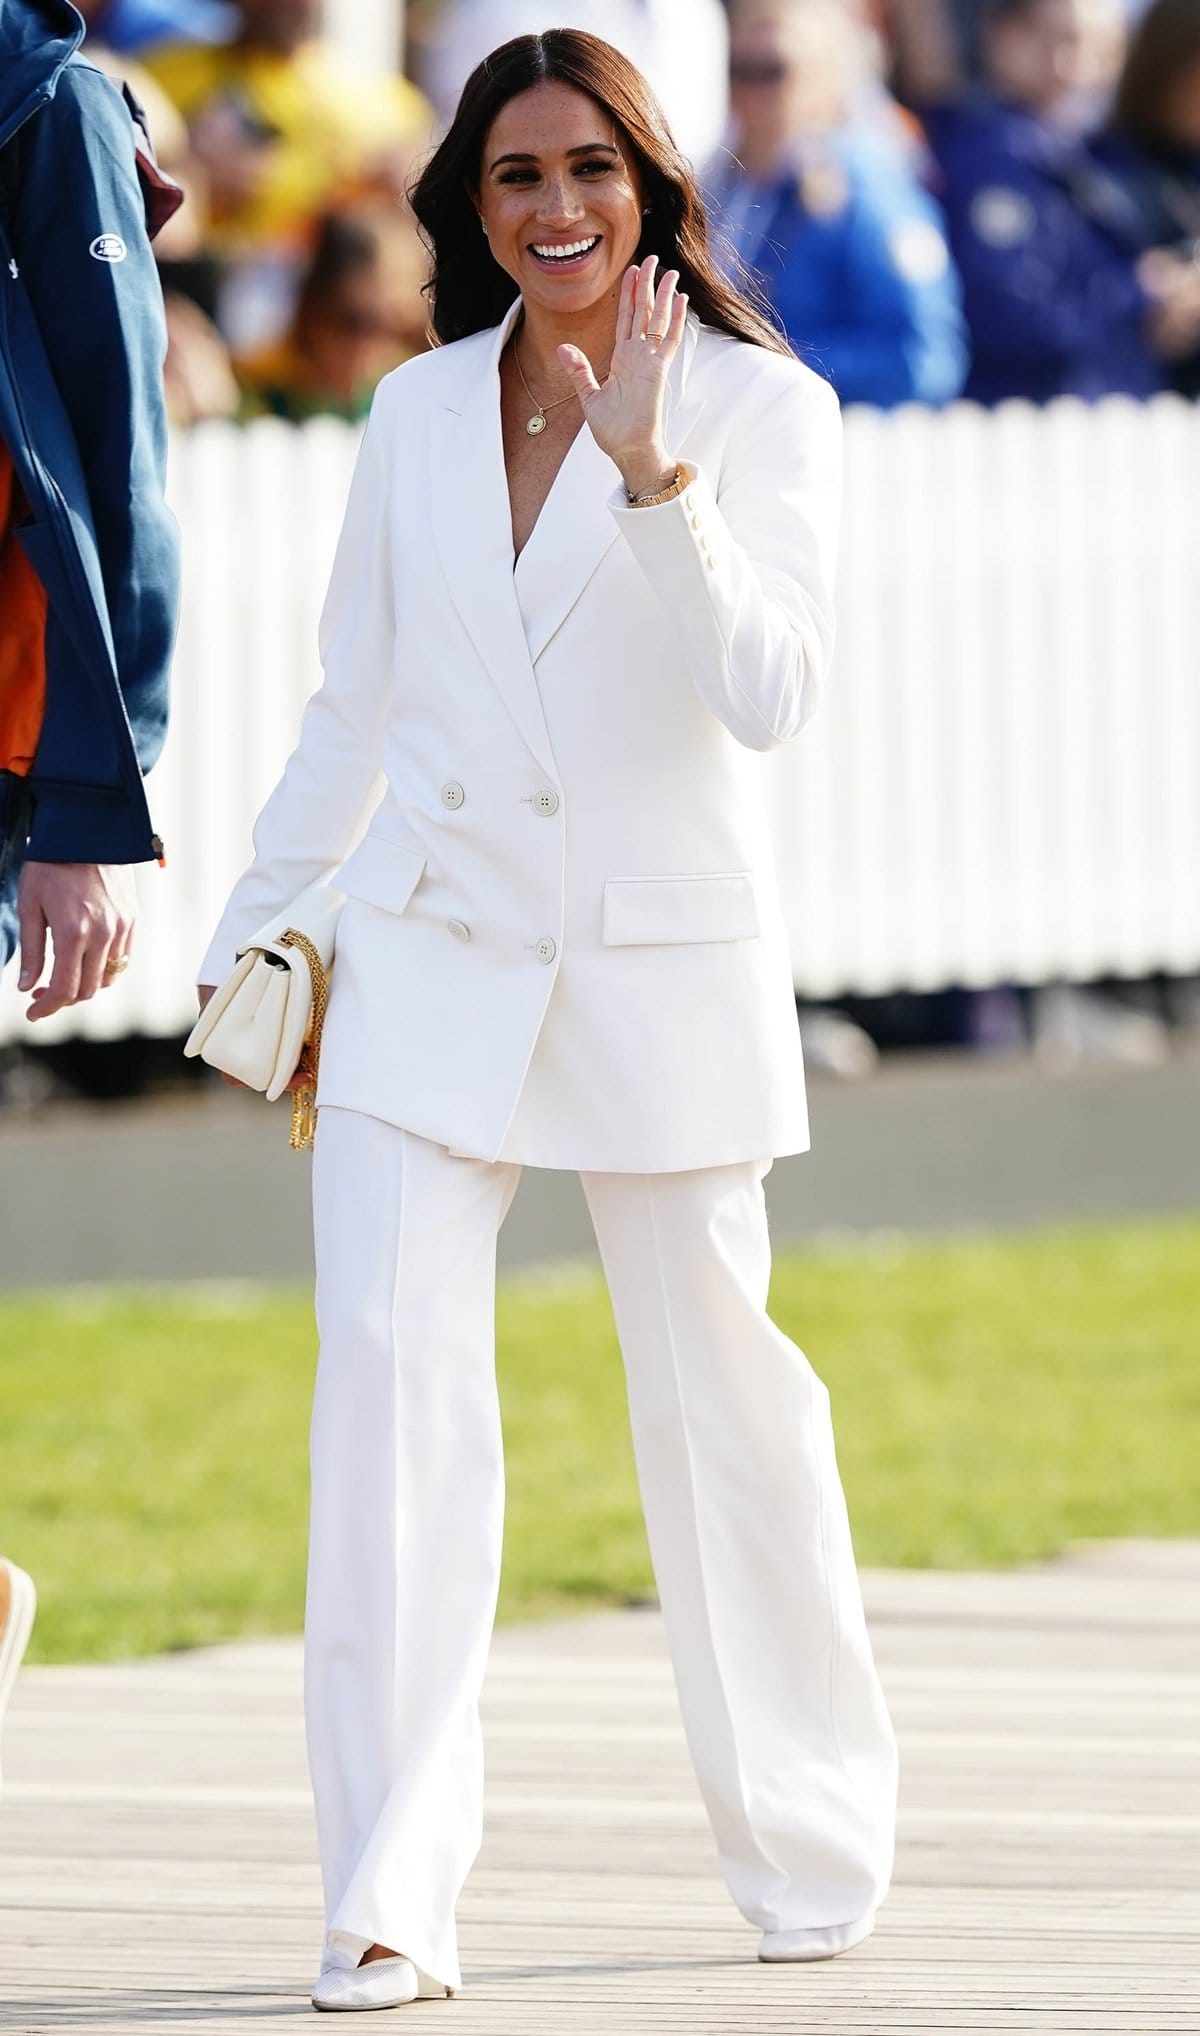 Meghan Markle wore a white Valentino suit and bag with Cartier earrings, Sophie Lis necklace, and Aquazzura heels